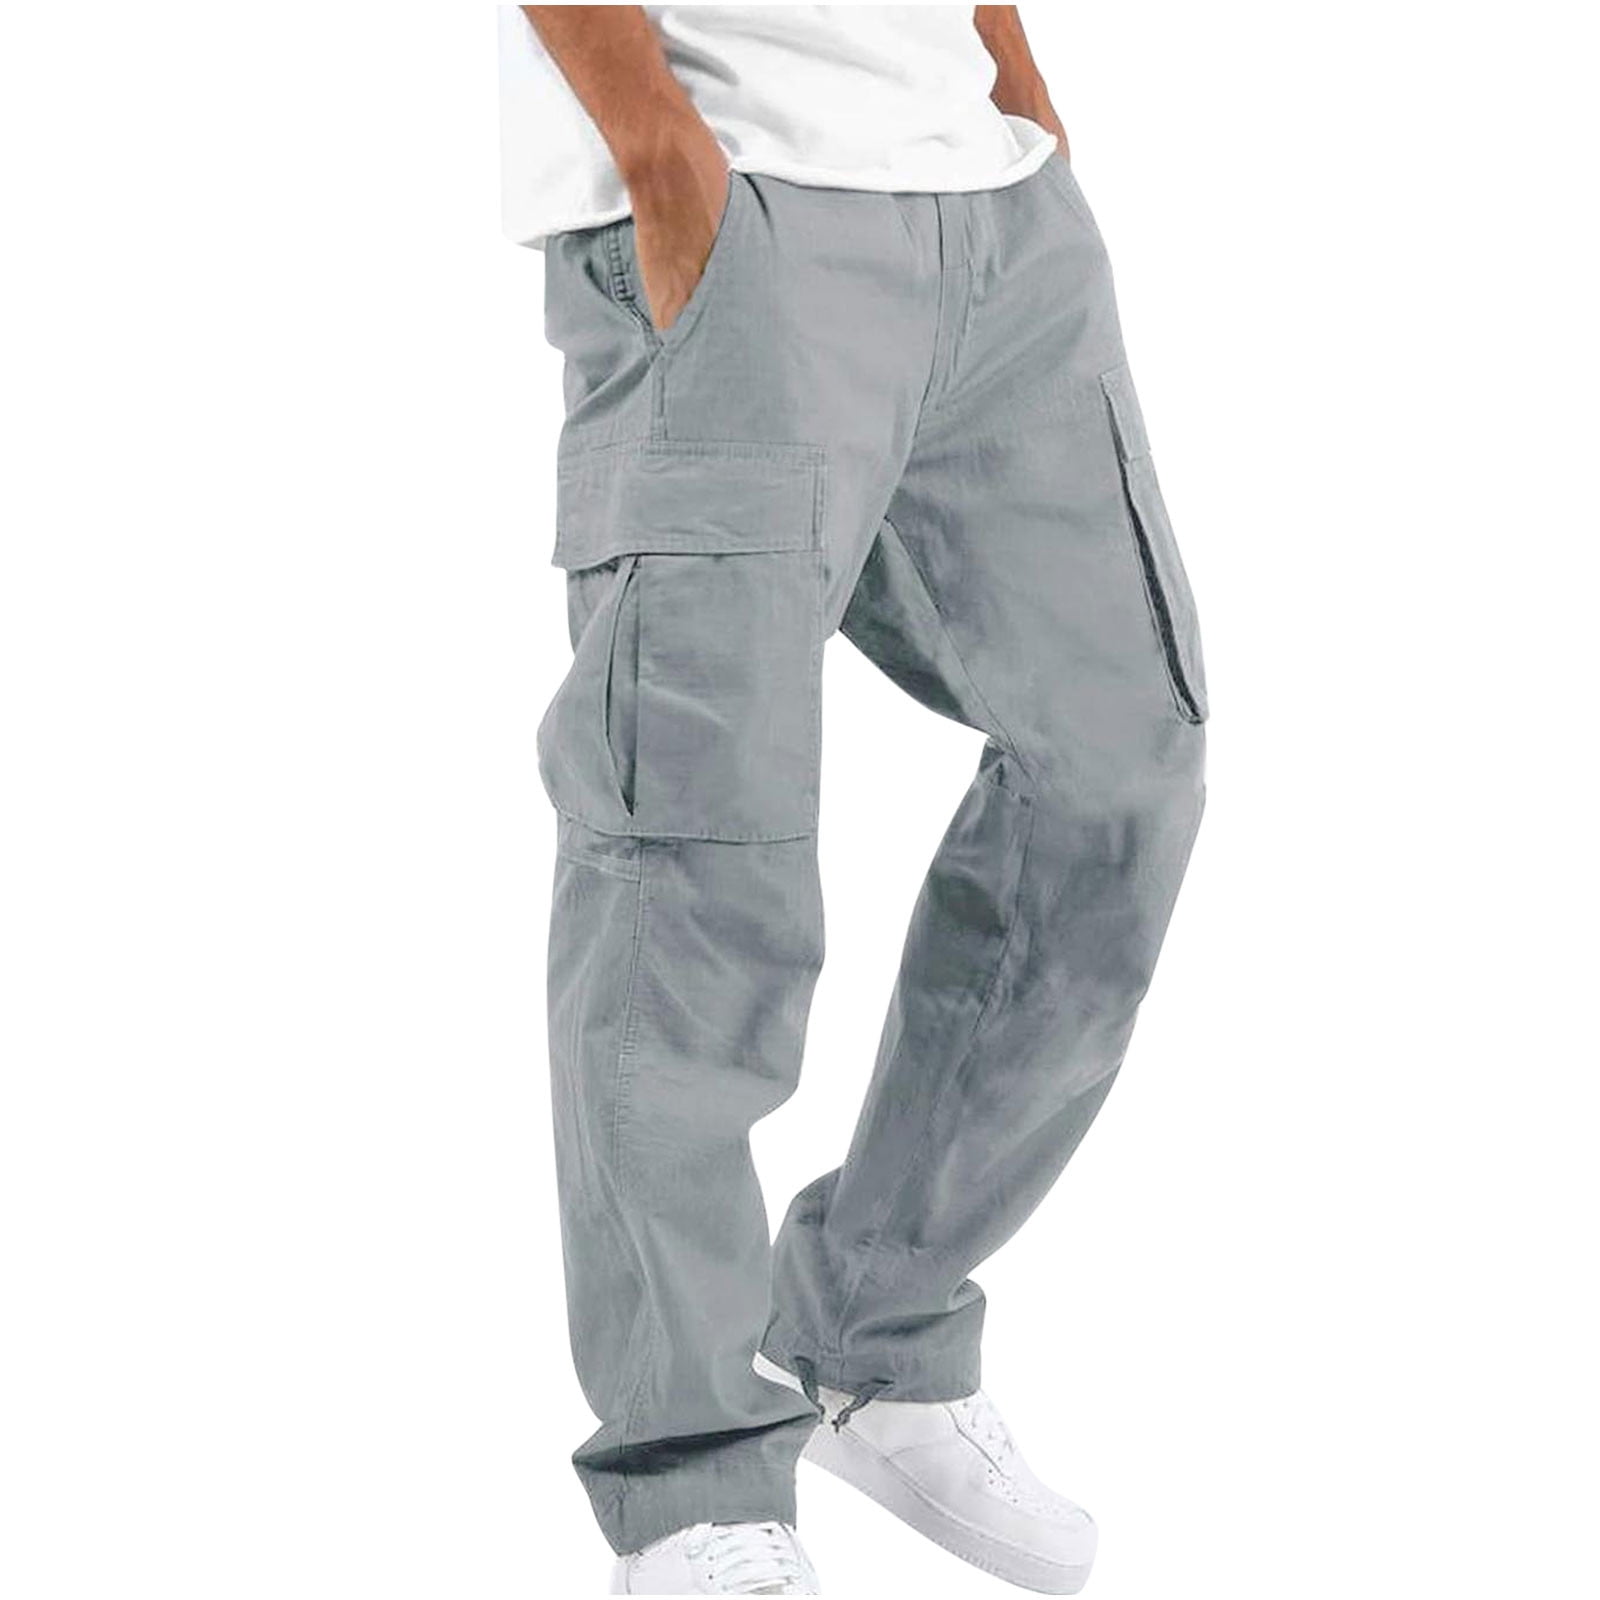 CYMMPU Men Solid Color Casual Pants Trousers Soft and Comfortable